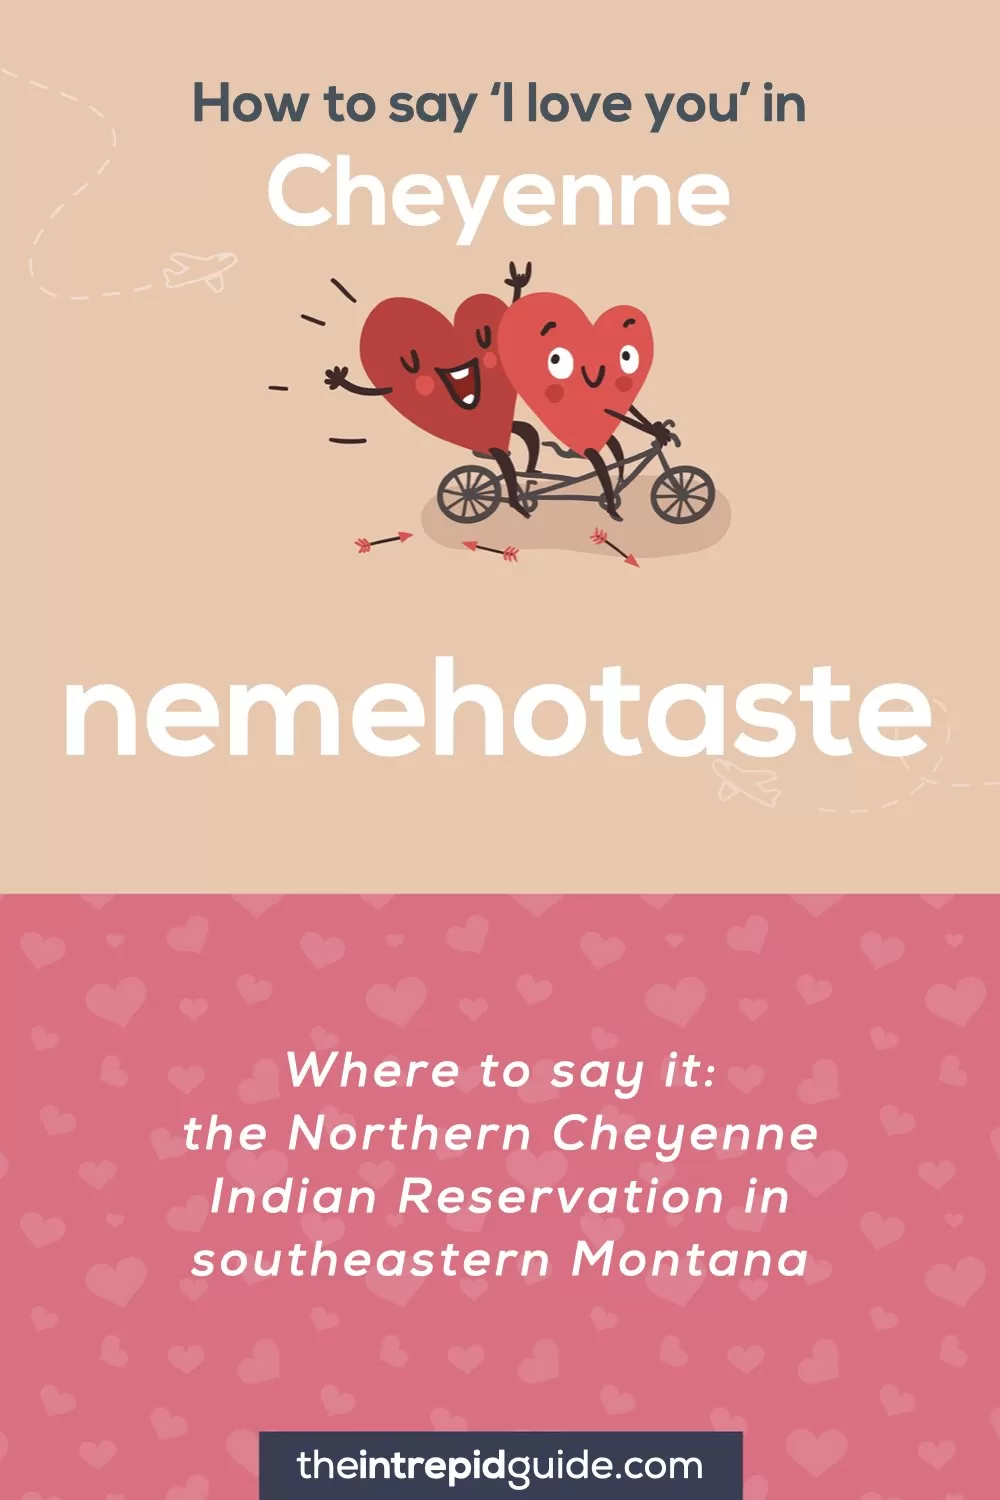 How to say I love you in different languages - Cheyenne - nemehotaste